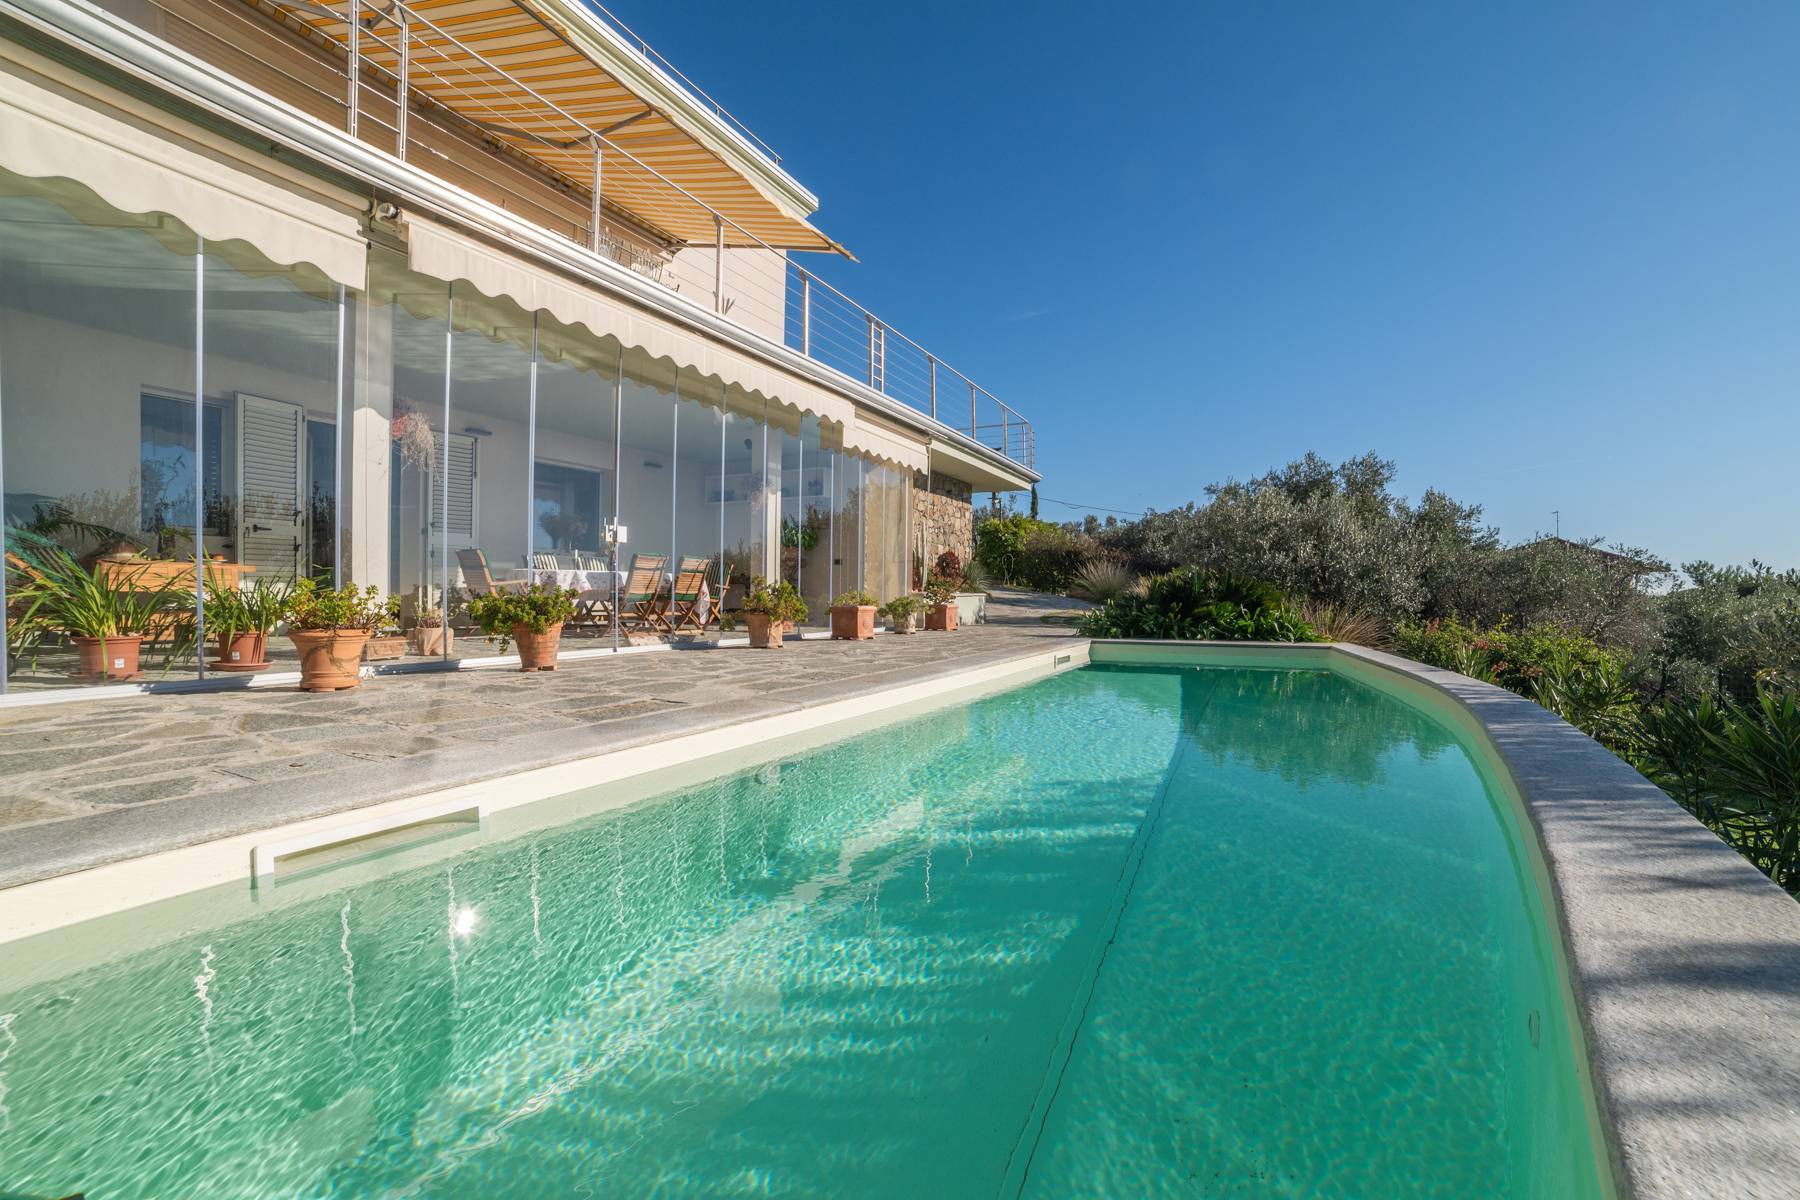 Villa with swimming pool and panoramic view